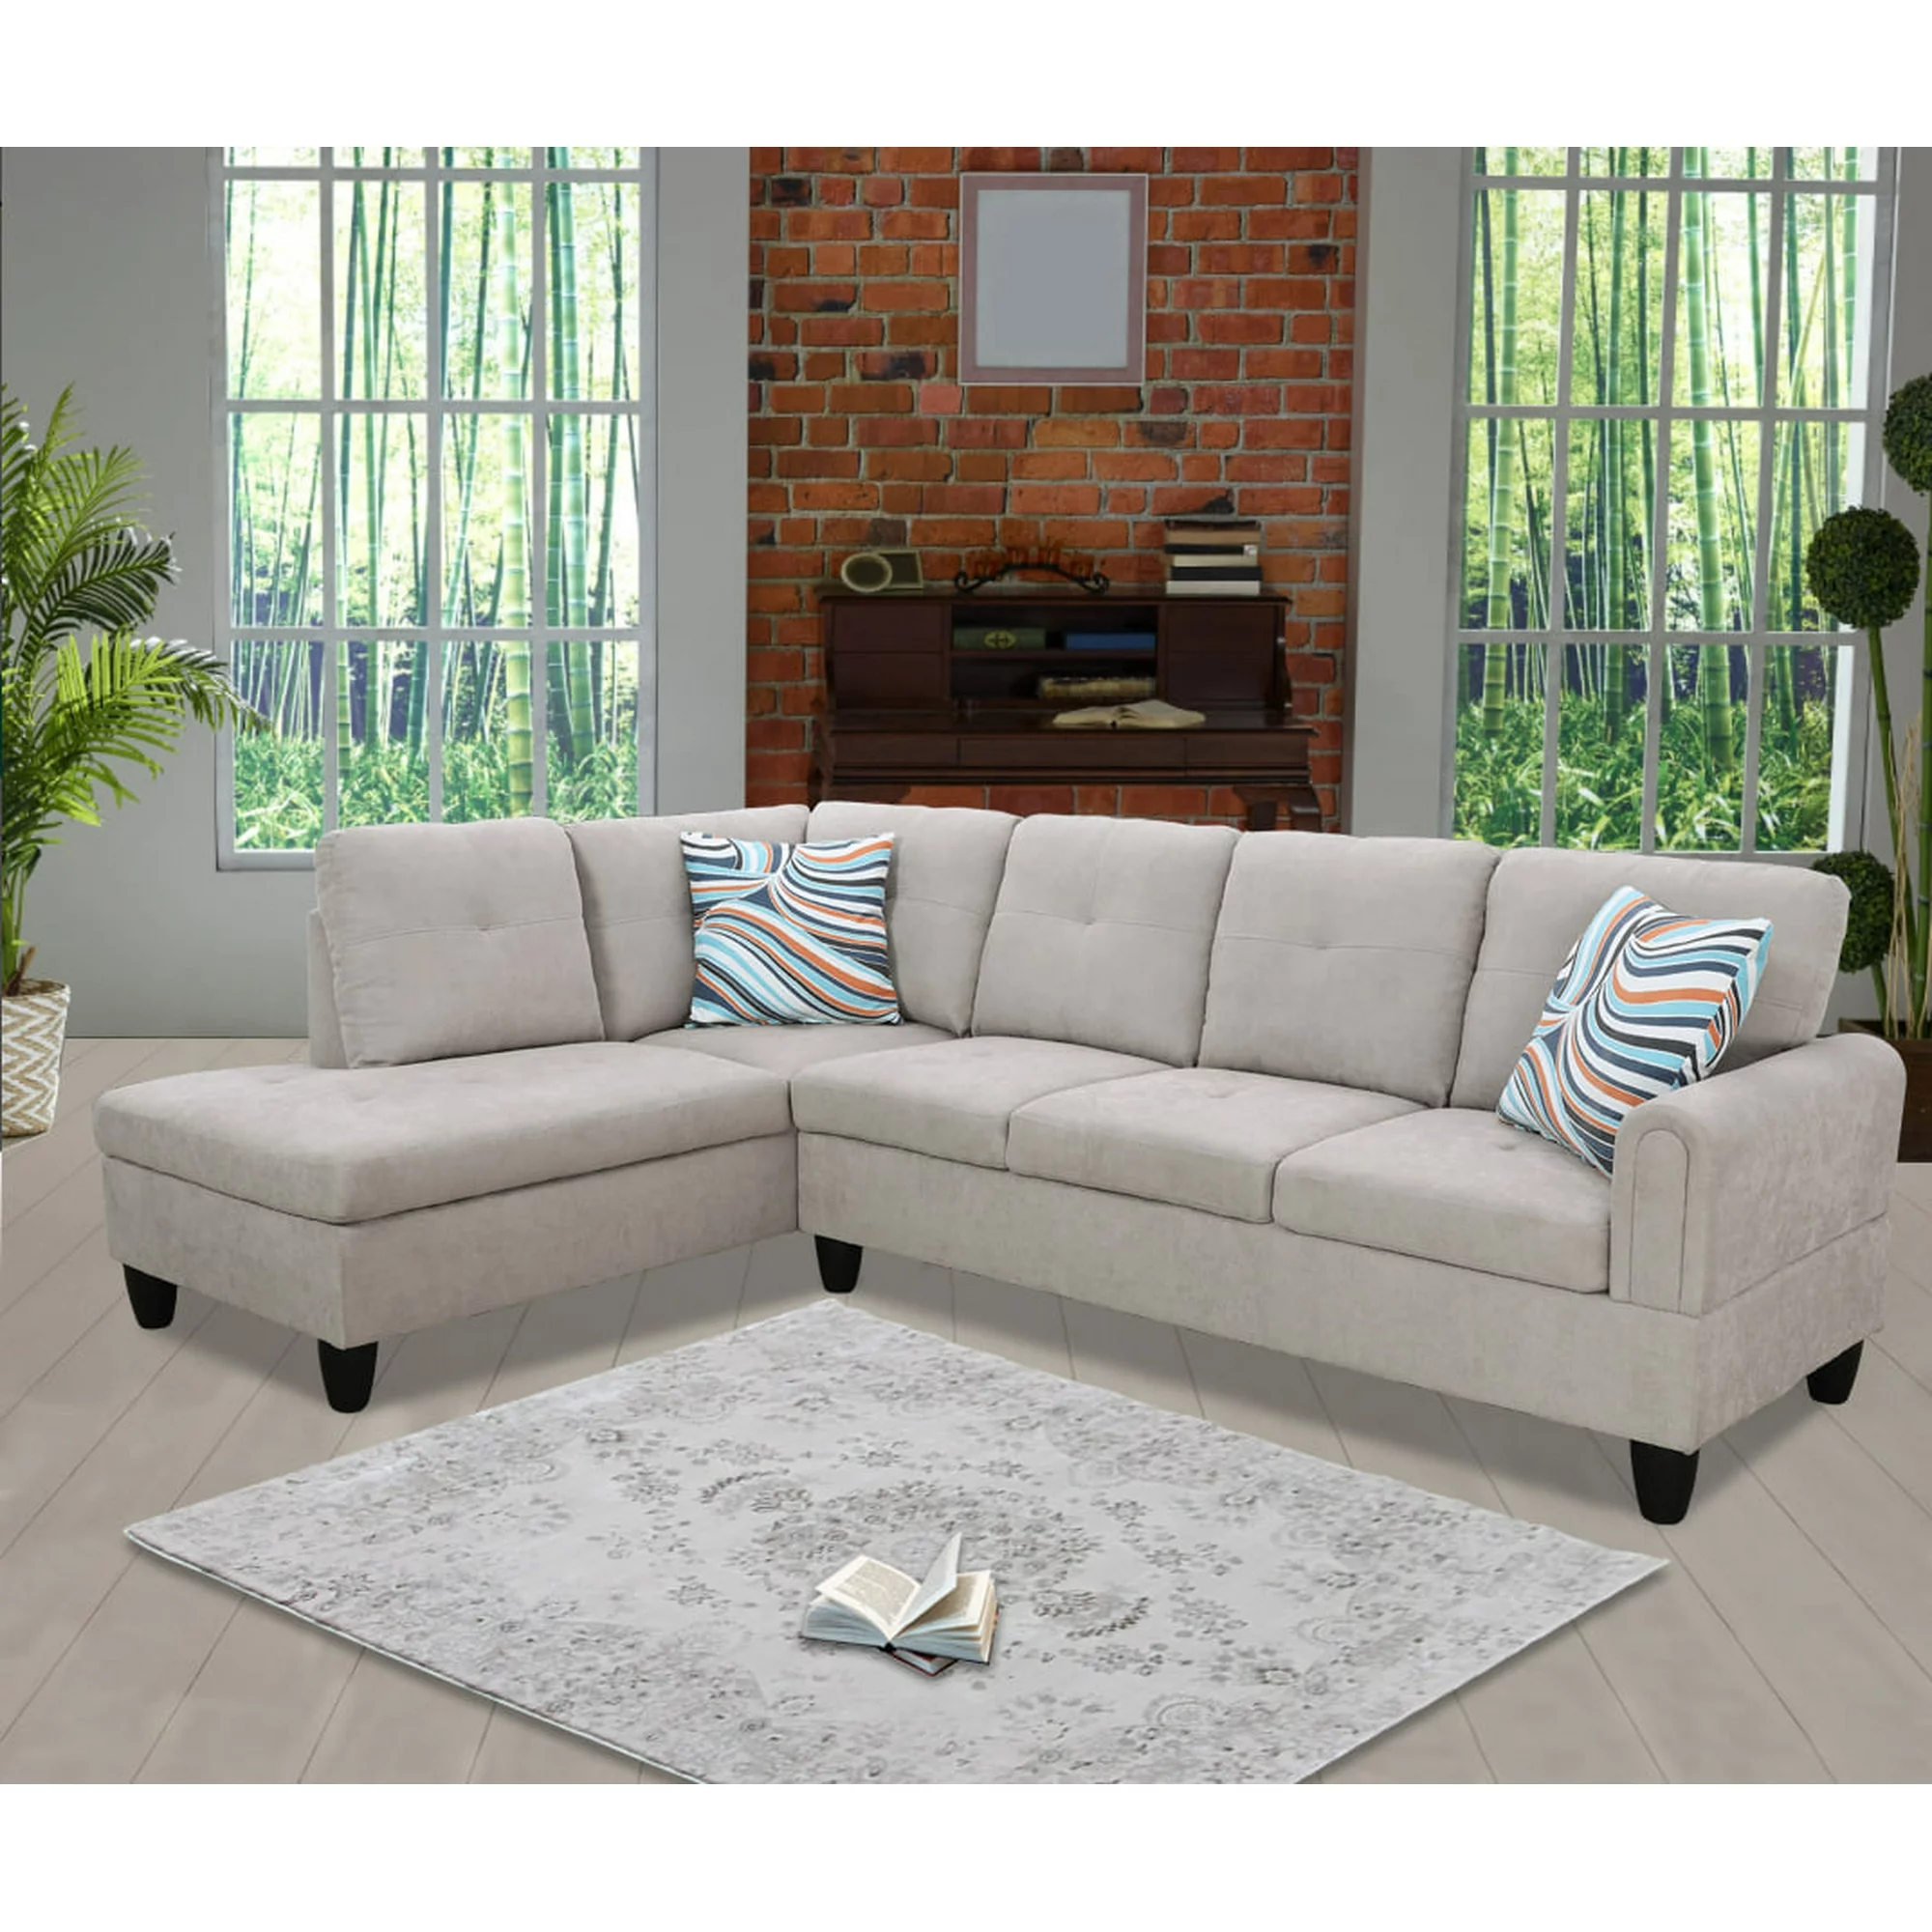 Ainehome Shaped Sectional Sofa SET, Left Hand Facing - Grey